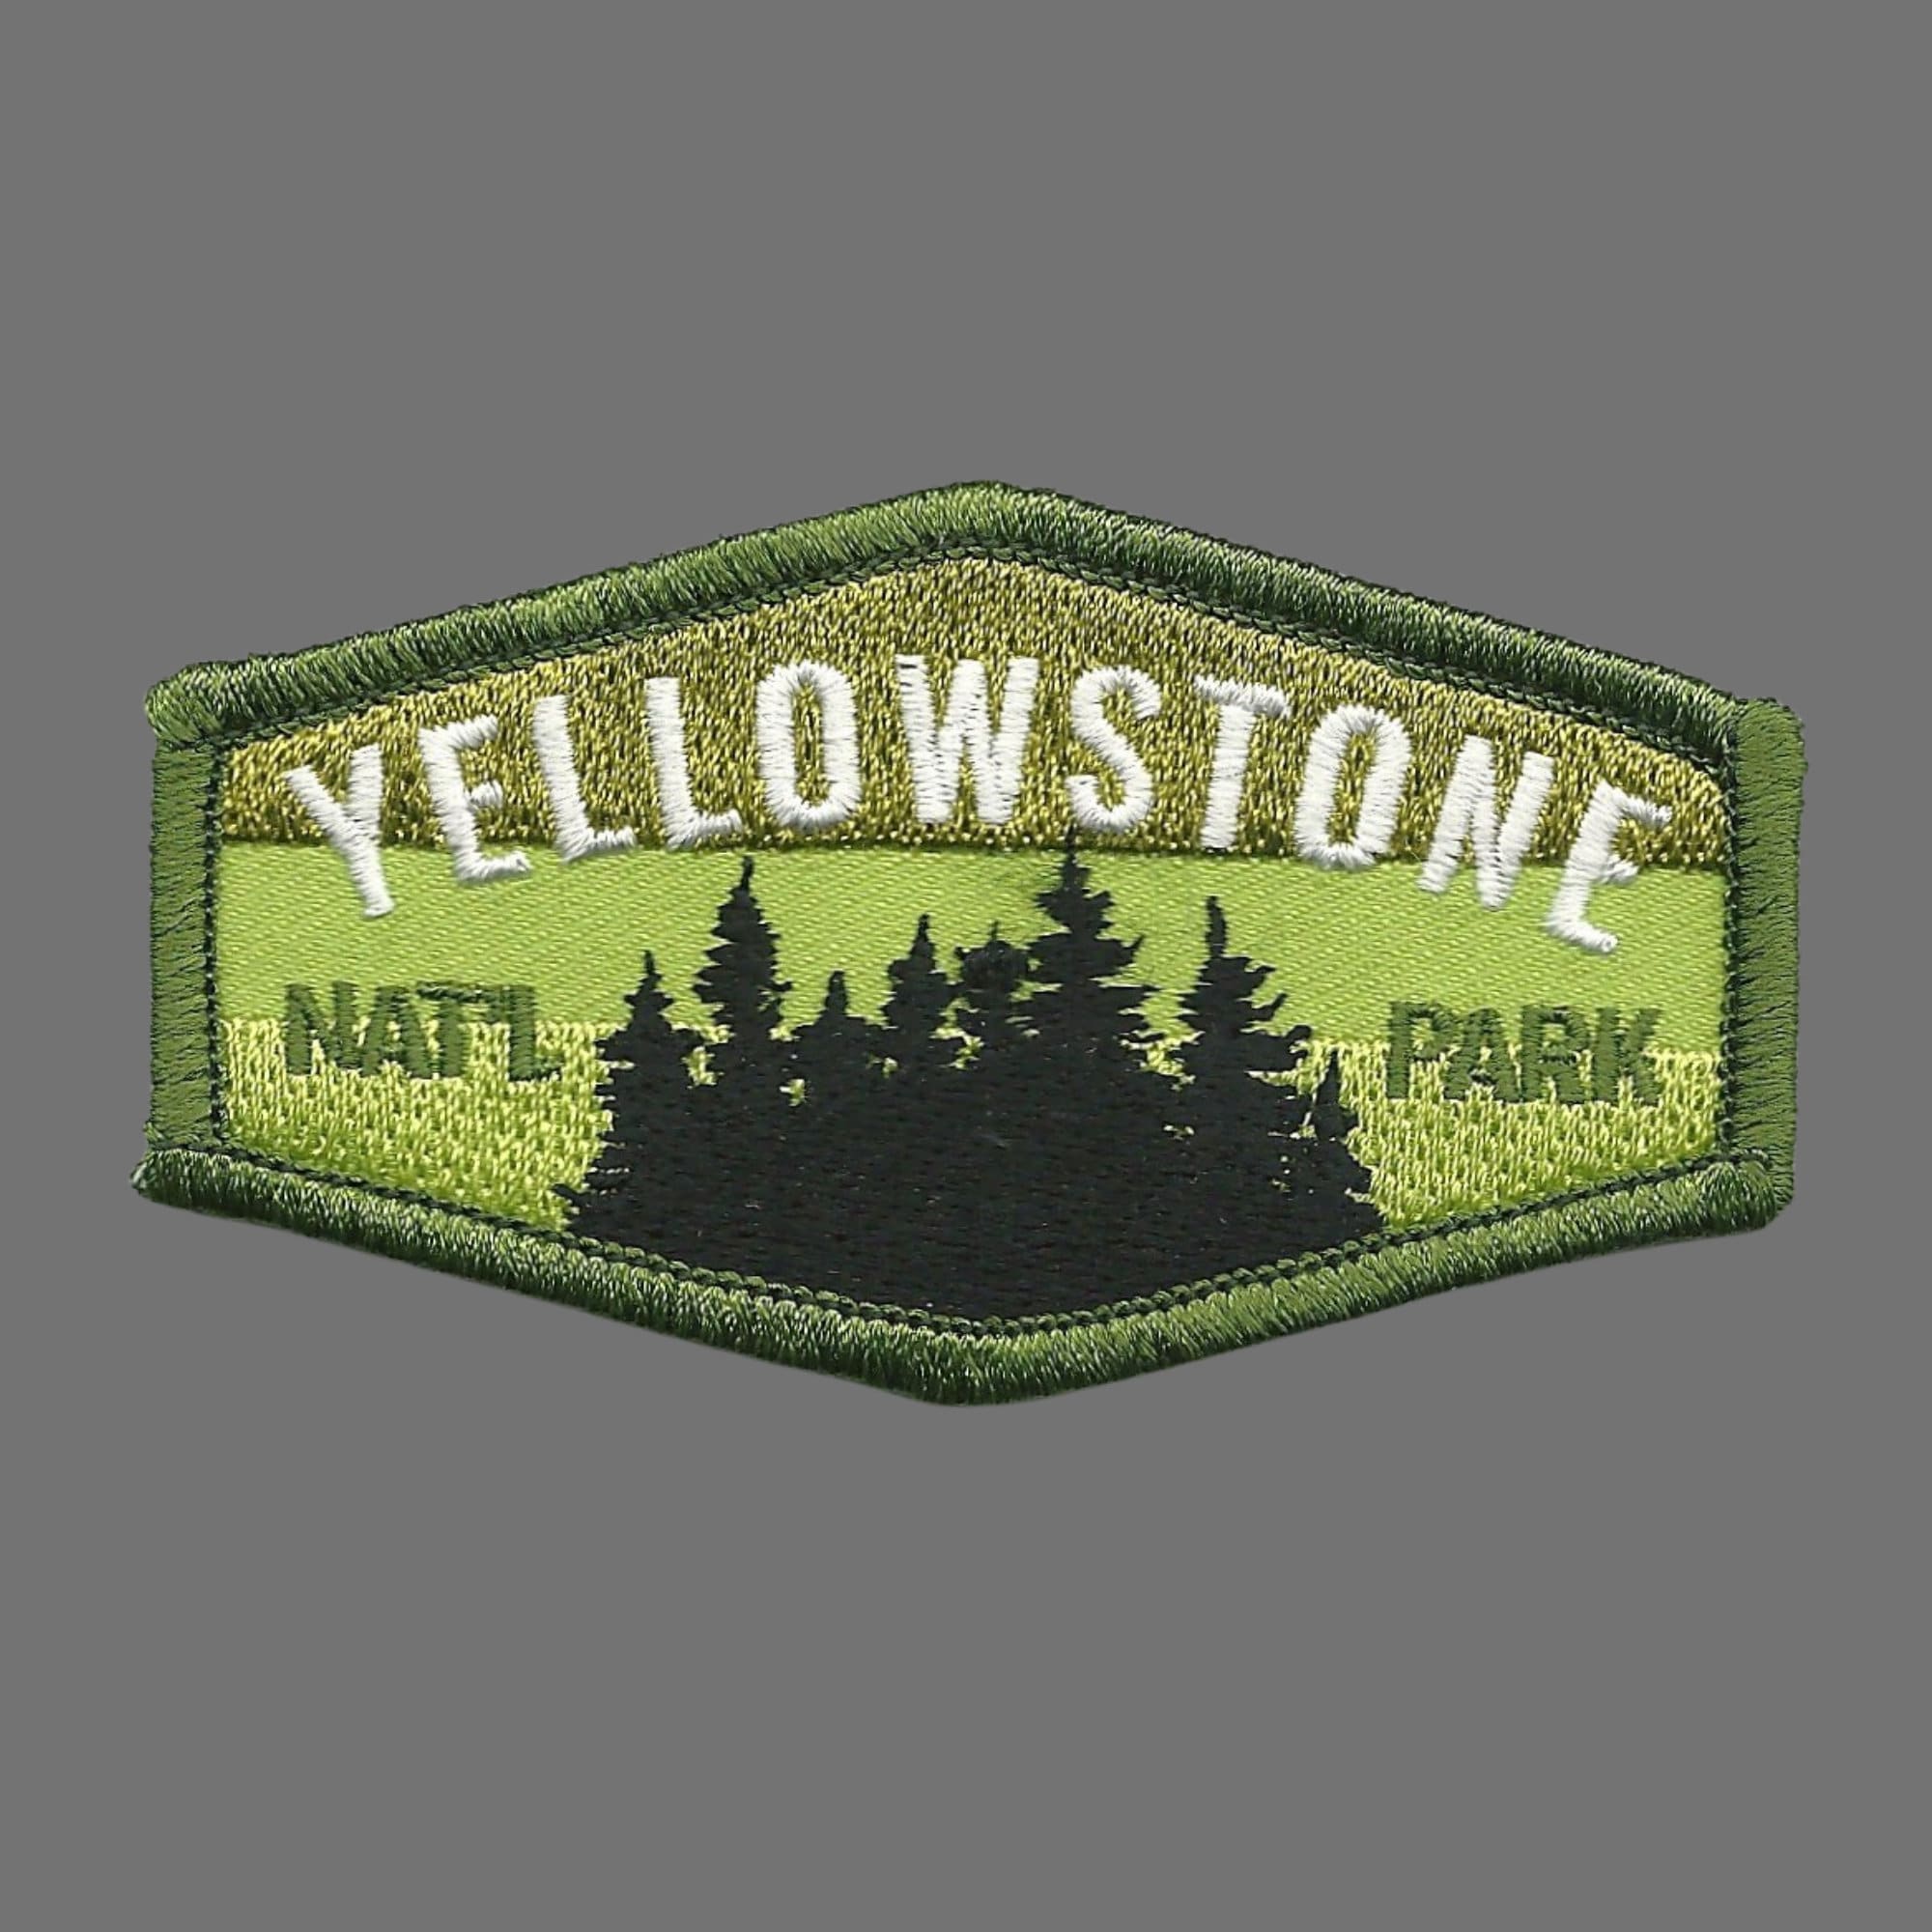 Yellowstone Embroidered Patch, Yellowstone National Park